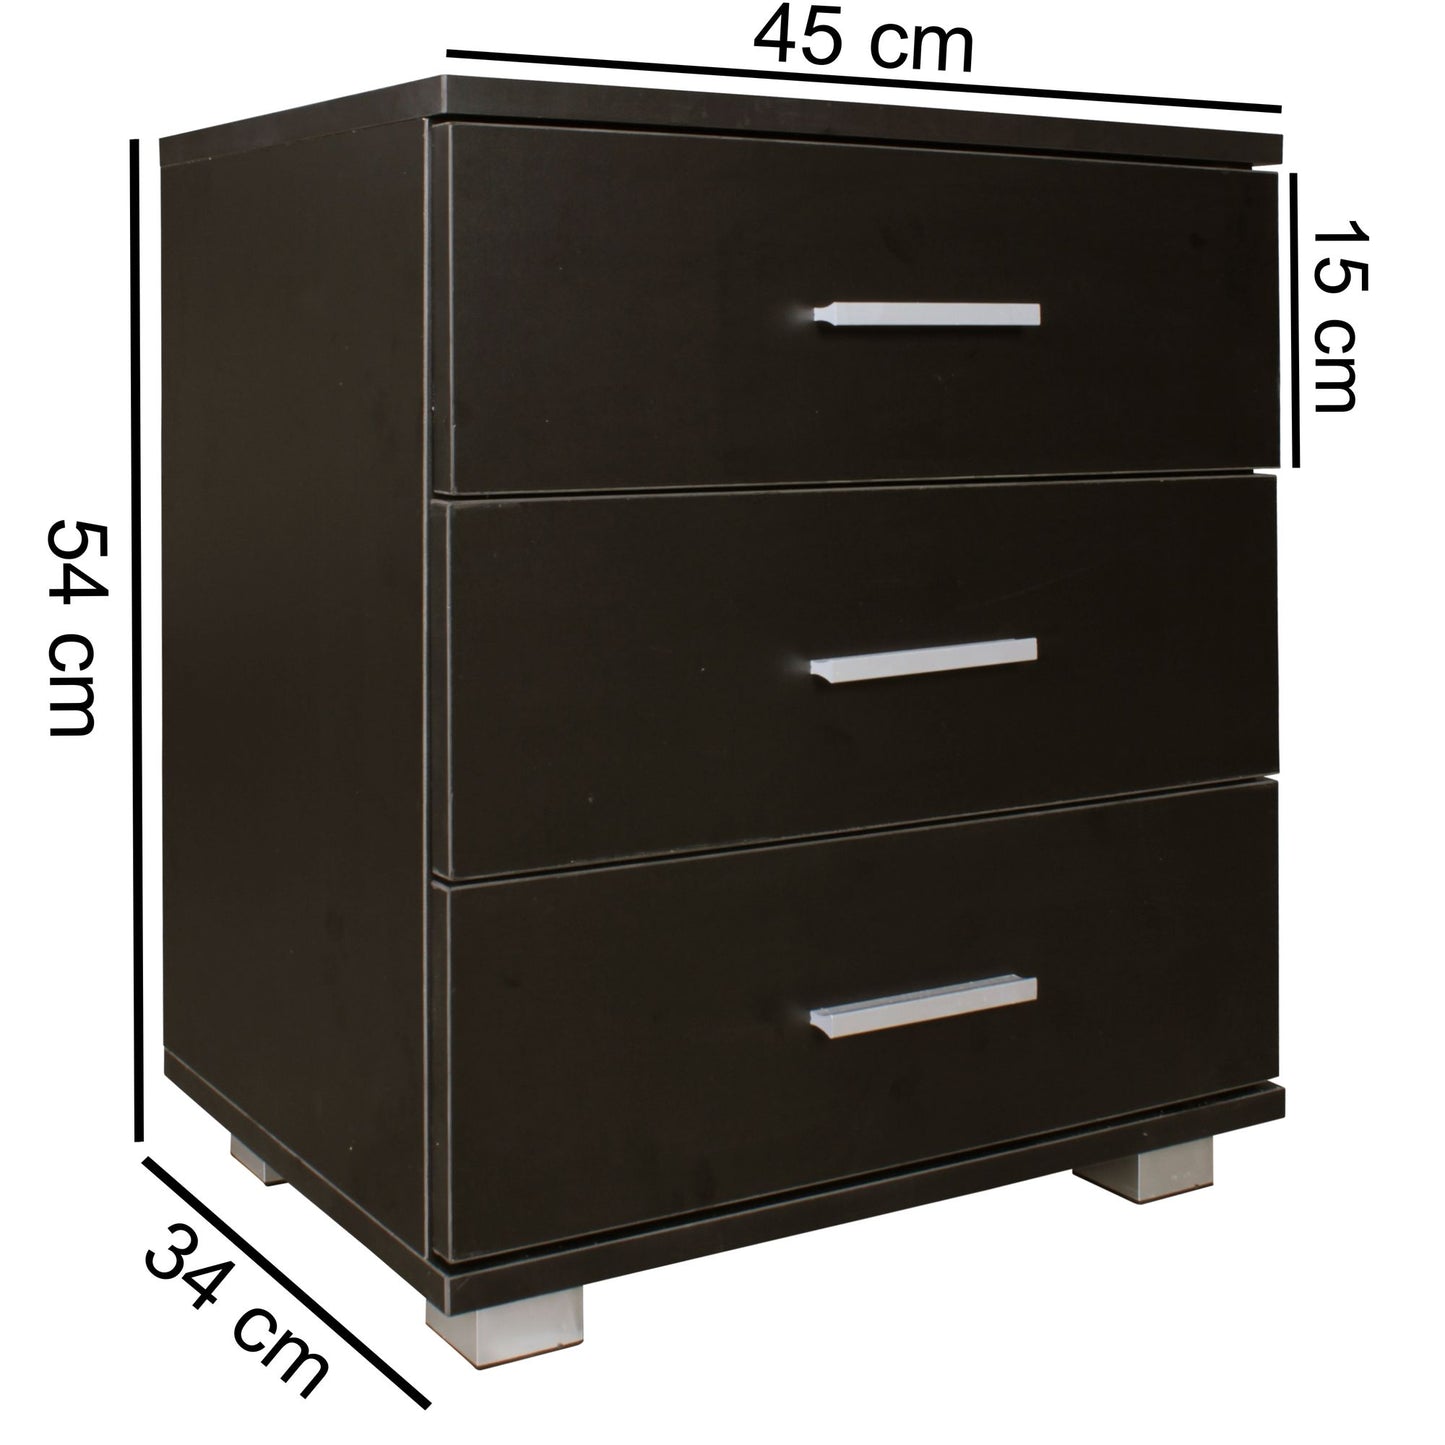 Nancy's Lamar Bedside table - Bedside table - Console - Chest of drawers - Cupboard - Chest of drawers - 3 Drawers - 45 x 54 x 34 cm (W x H x D)